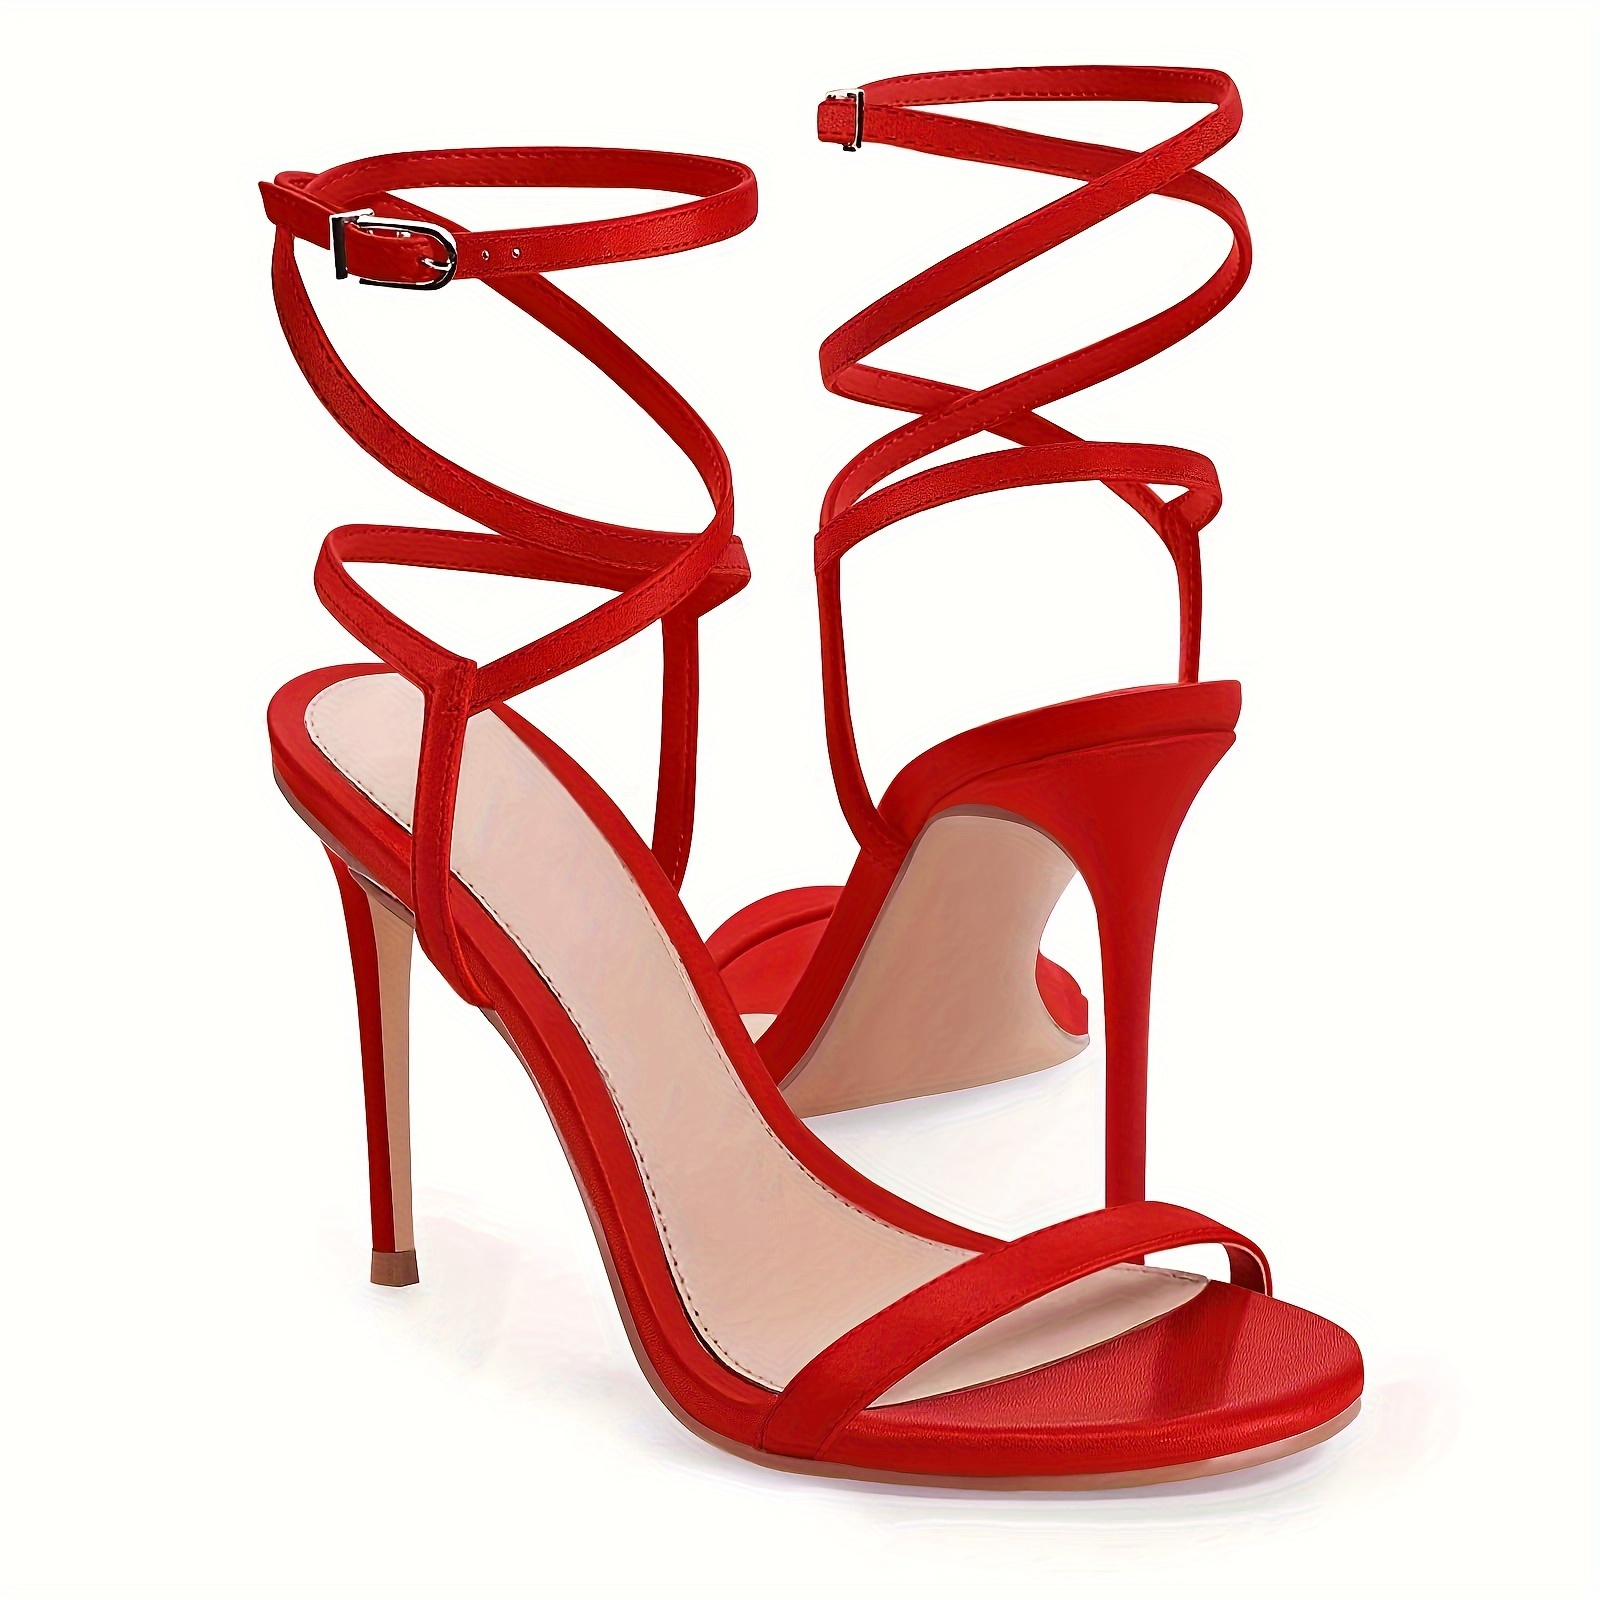 

Women's Red Strappy High Heel Sandals, Ankle Strap Summer Dress Shoes, Faux Leather Material, For Evening Events